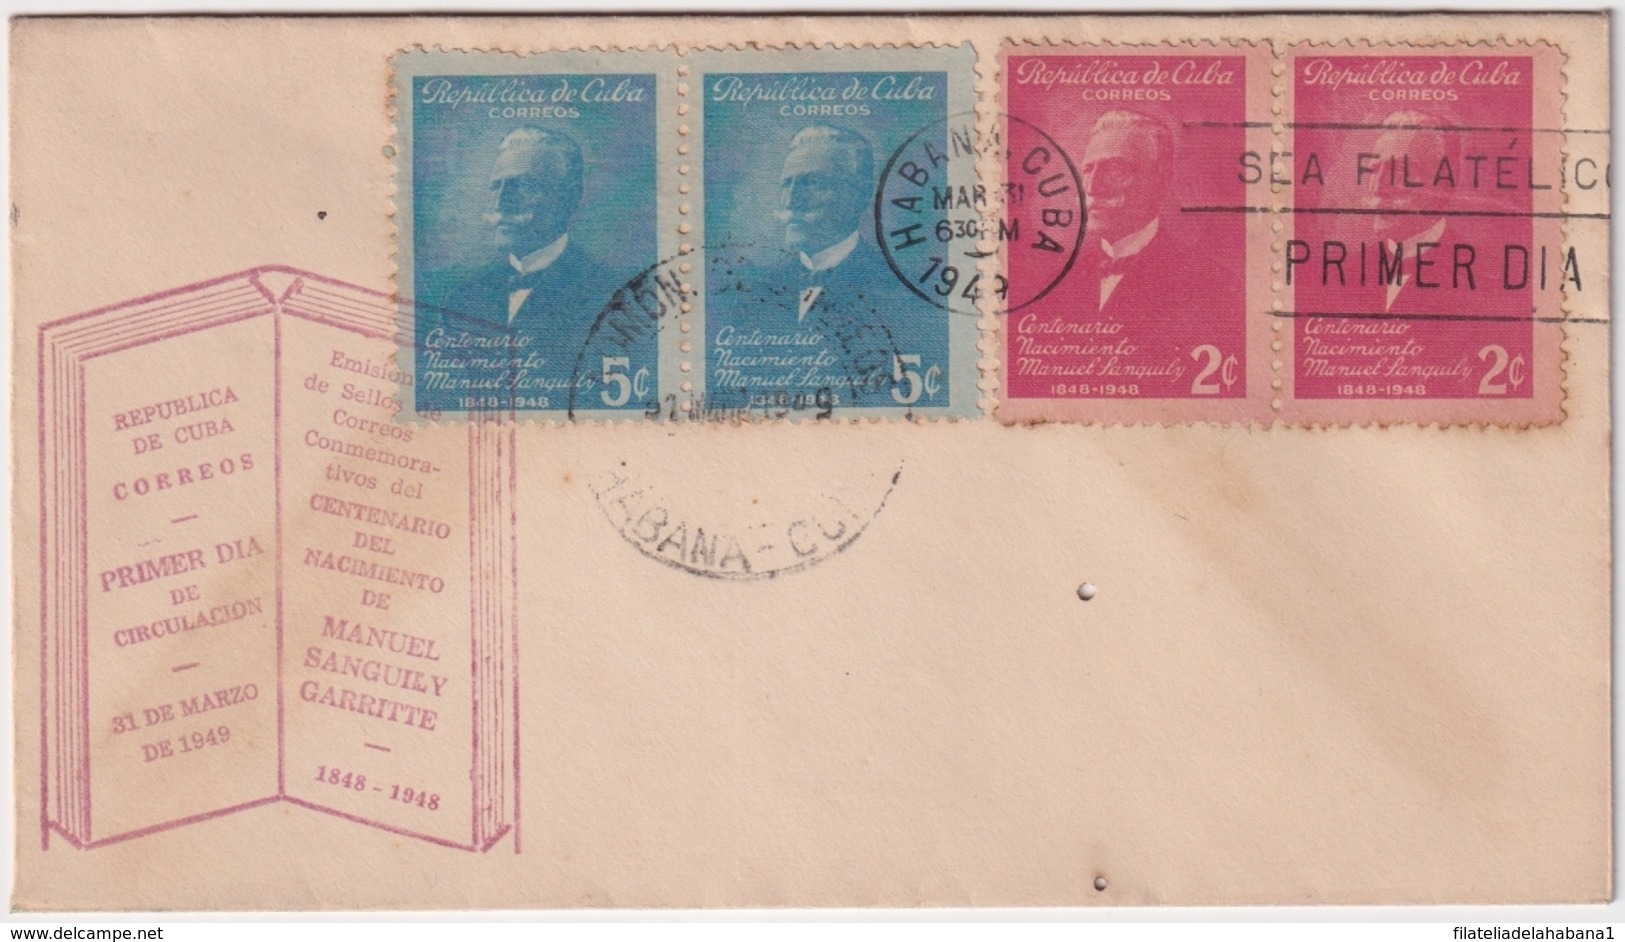 1949-FDC-151 CUBA REPUBLICA 1949 FDC MANUEL SANGUILY GARRITE RED CANCEL PAIR INDEPENDENCE WAR. - Nuovi